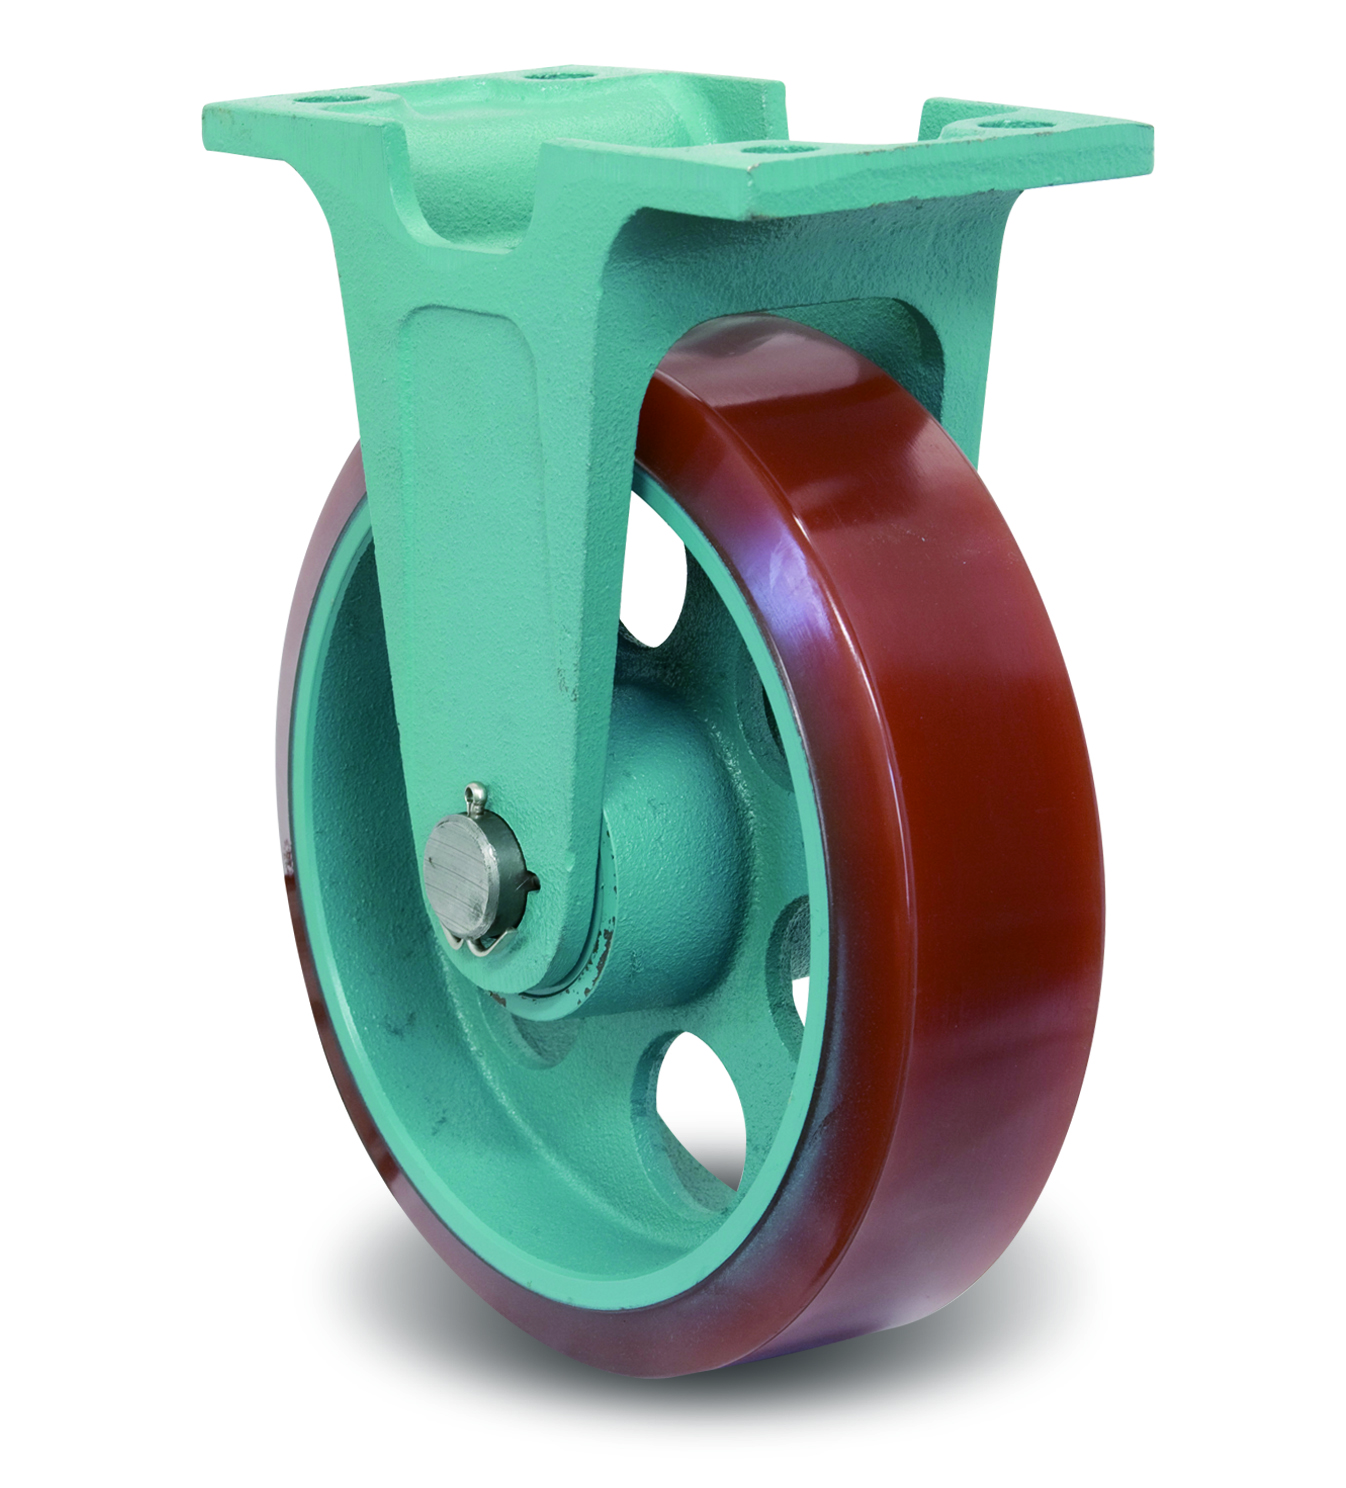 Casters - Urethane with wide ductile steel fixed plate and bracket, MG-W, EU/MG-W series.